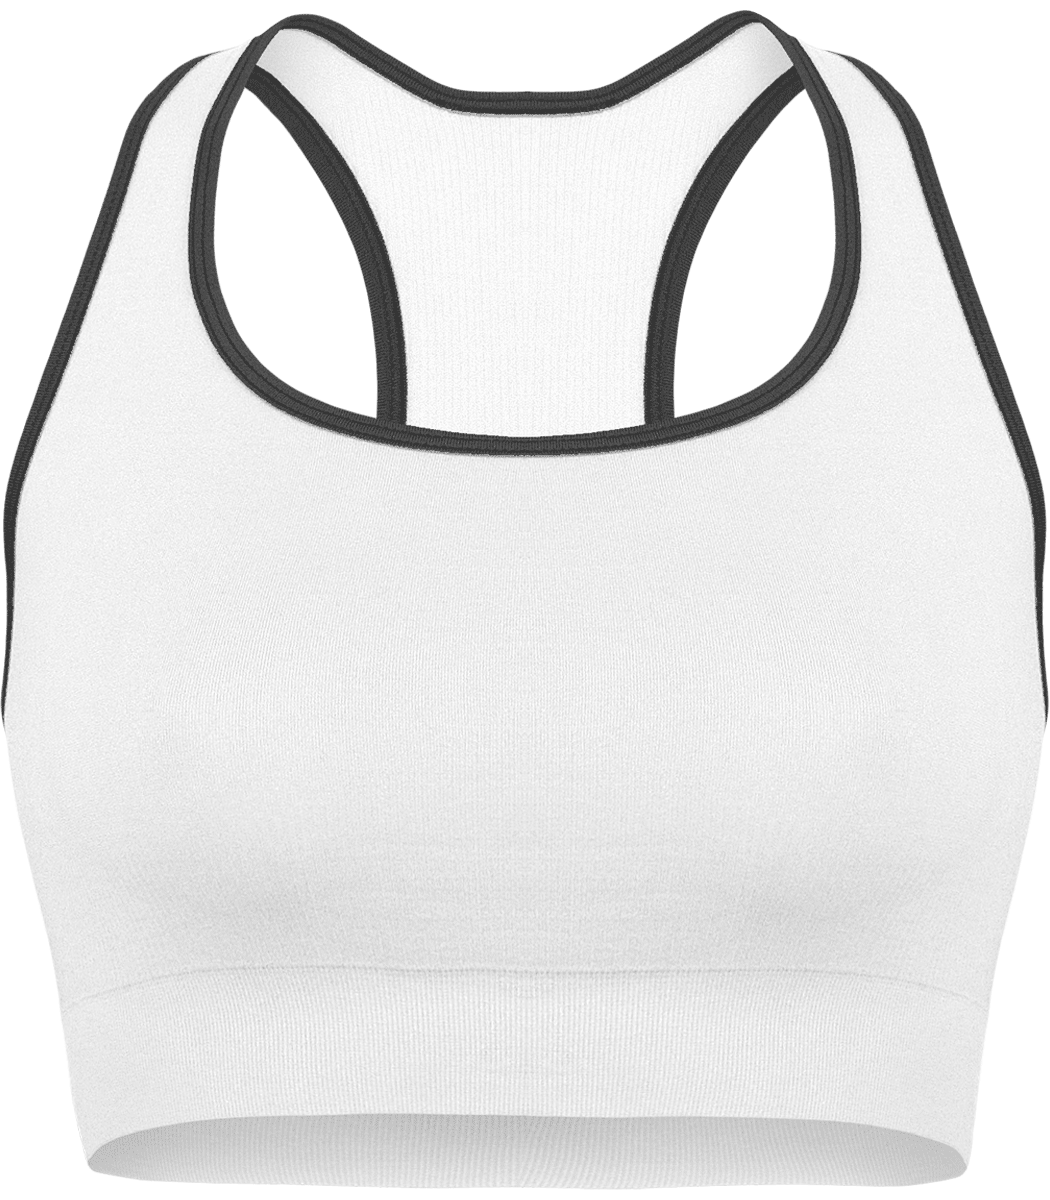 Printed Sports Bra | Seamless | Supportive And Feminine White / Storm Grey